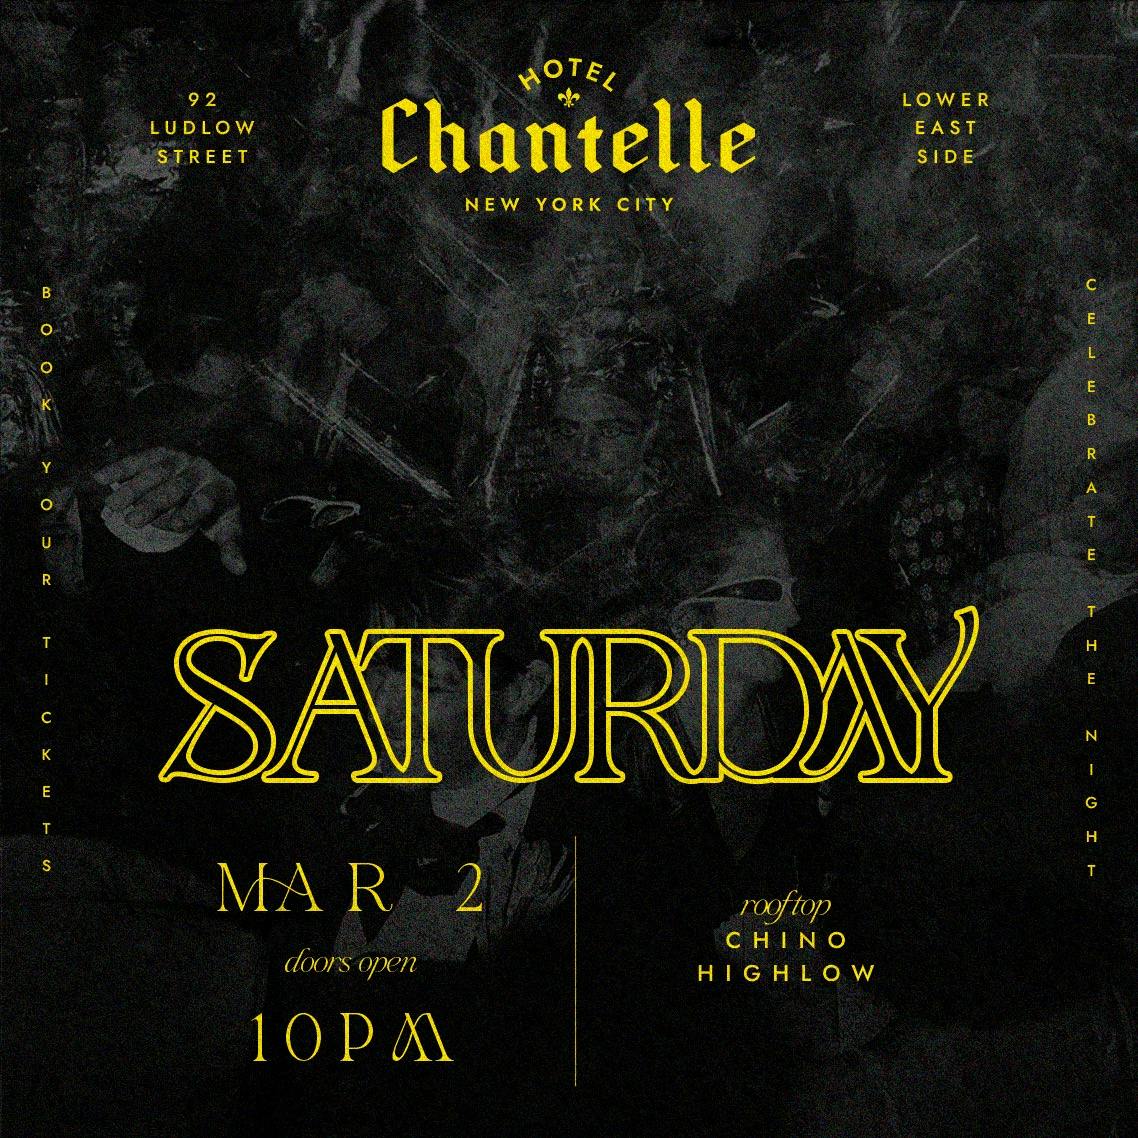 HOTEL CHANTELLE ROOFTOP Friday Nights, FREE Guest List w/ RSVP Tickets,  Multiple Dates